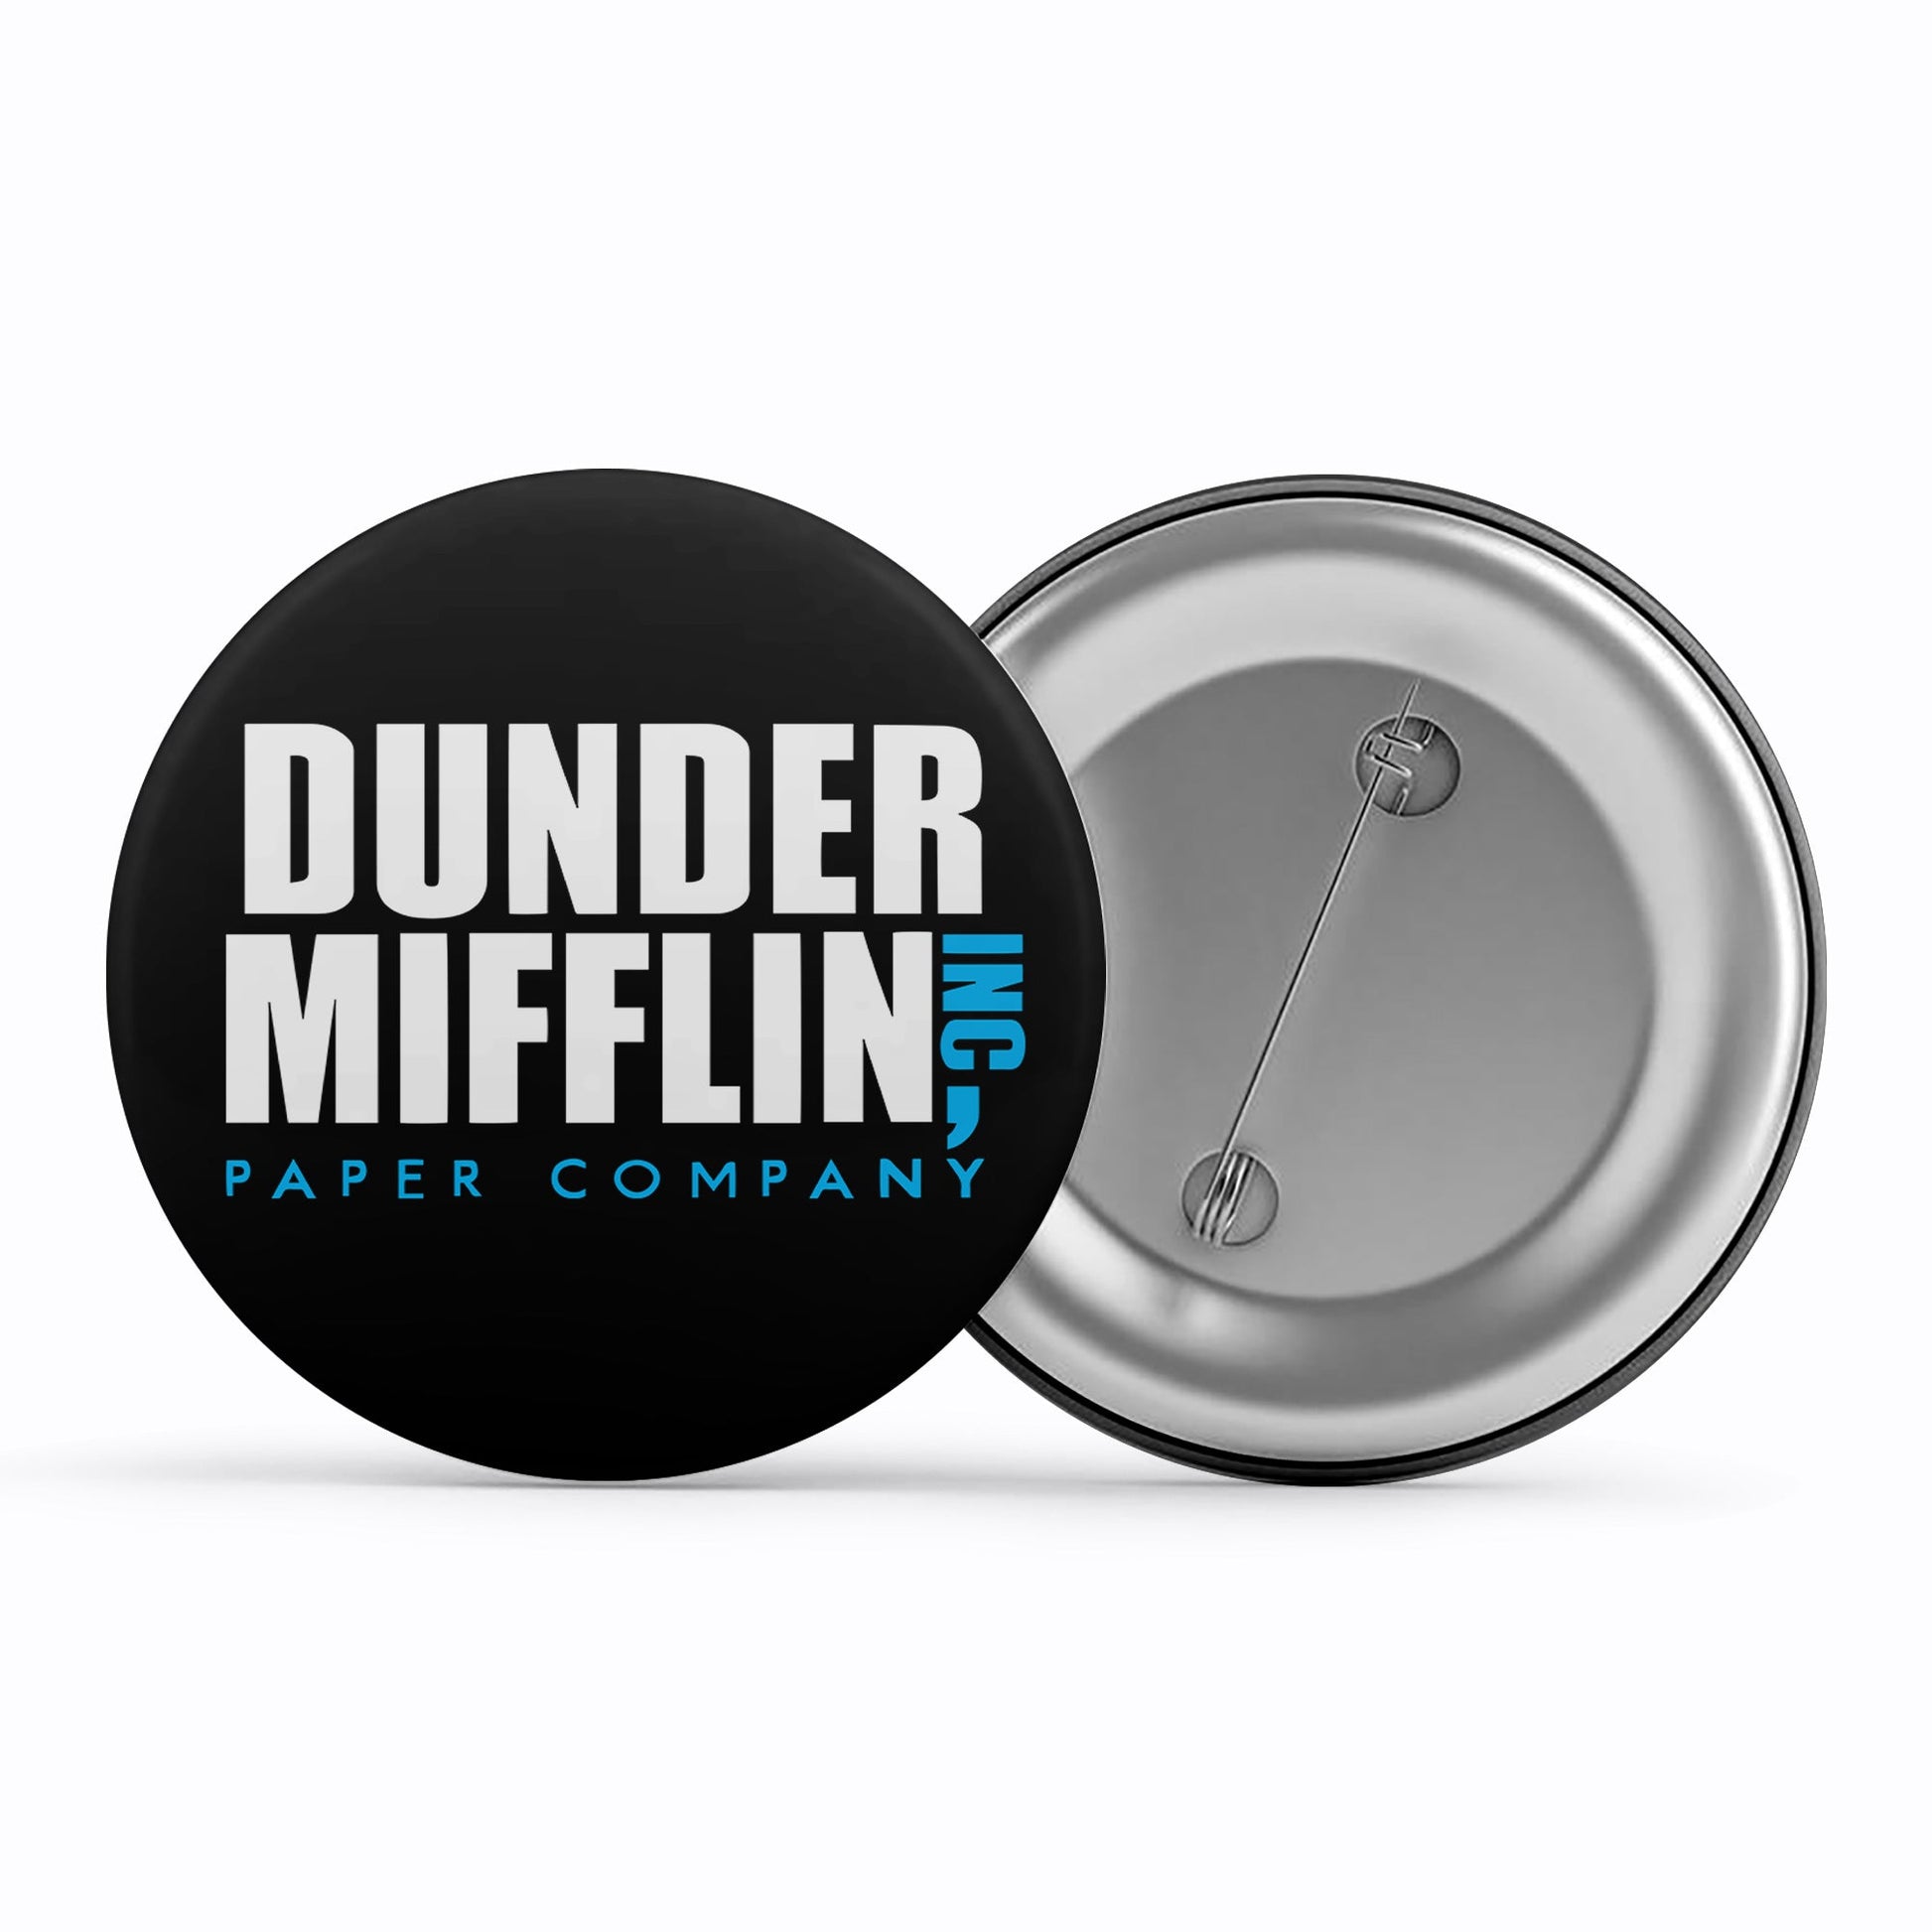 the office dunder mifflin badge pin button tv & movies buy online india the banyan tee tbt men women girls boys unisex  - paper company